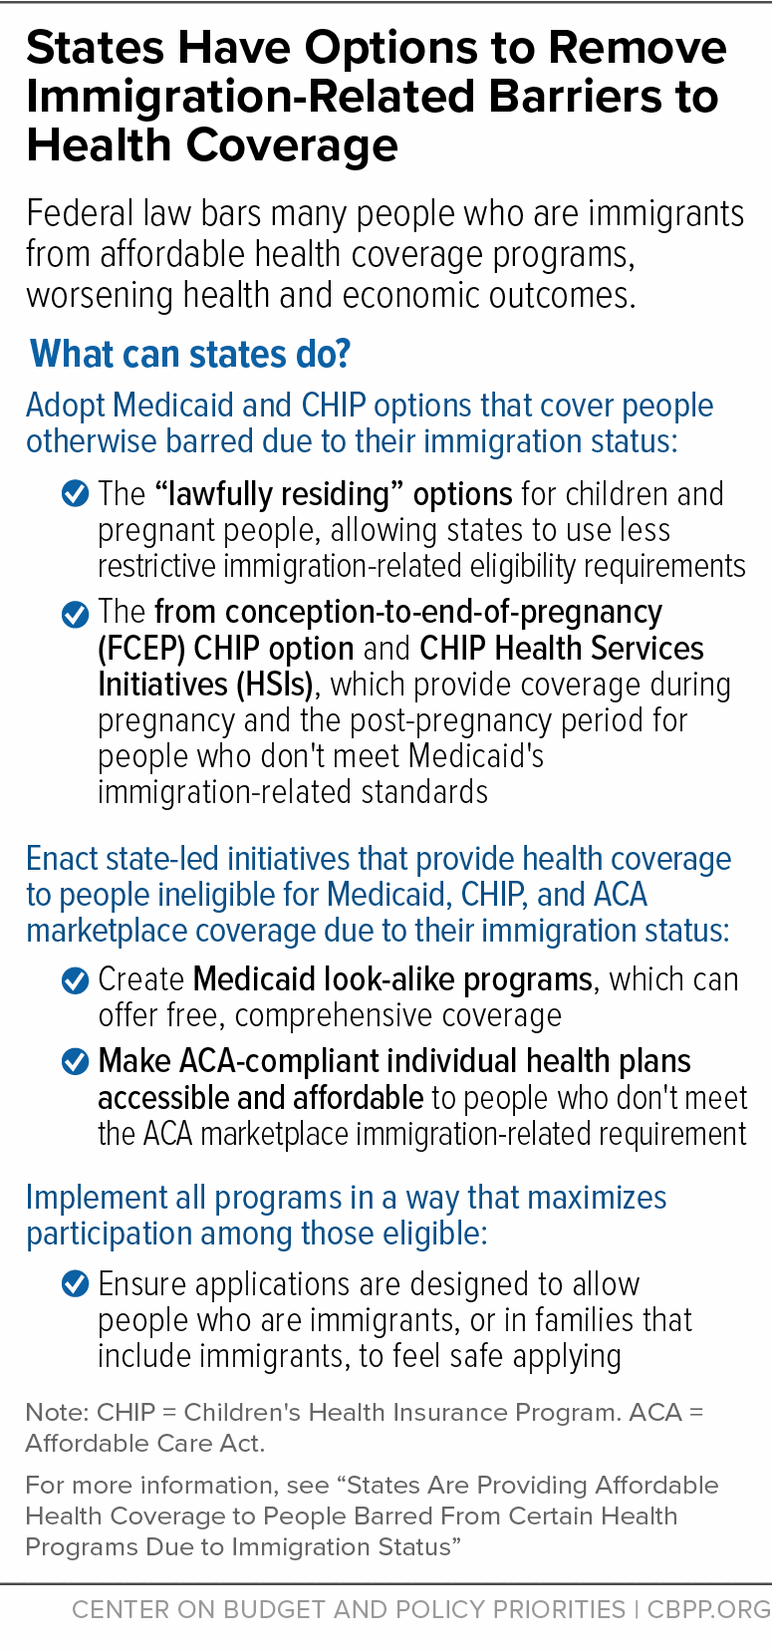 States Have Options to Remove Barriers to Immigration-Related Health Coverage 